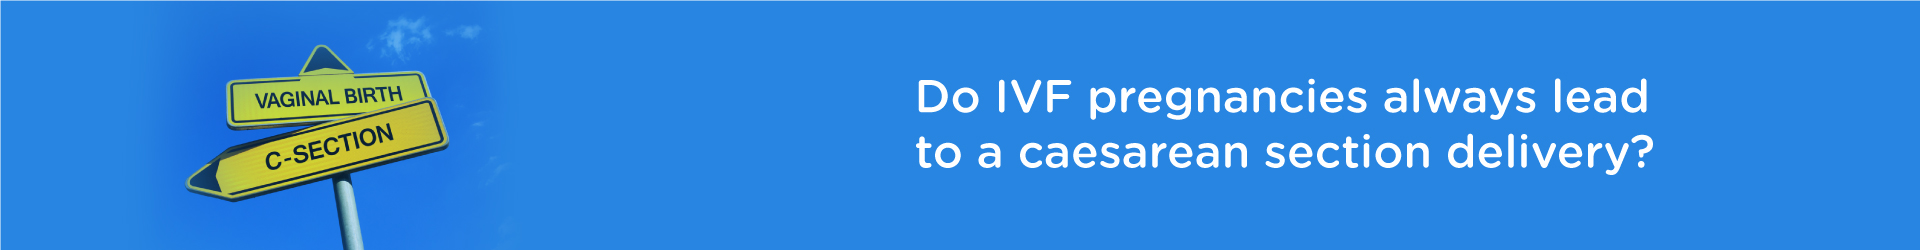 Does IVF pregnancies always lead to Caesarean section delivery?